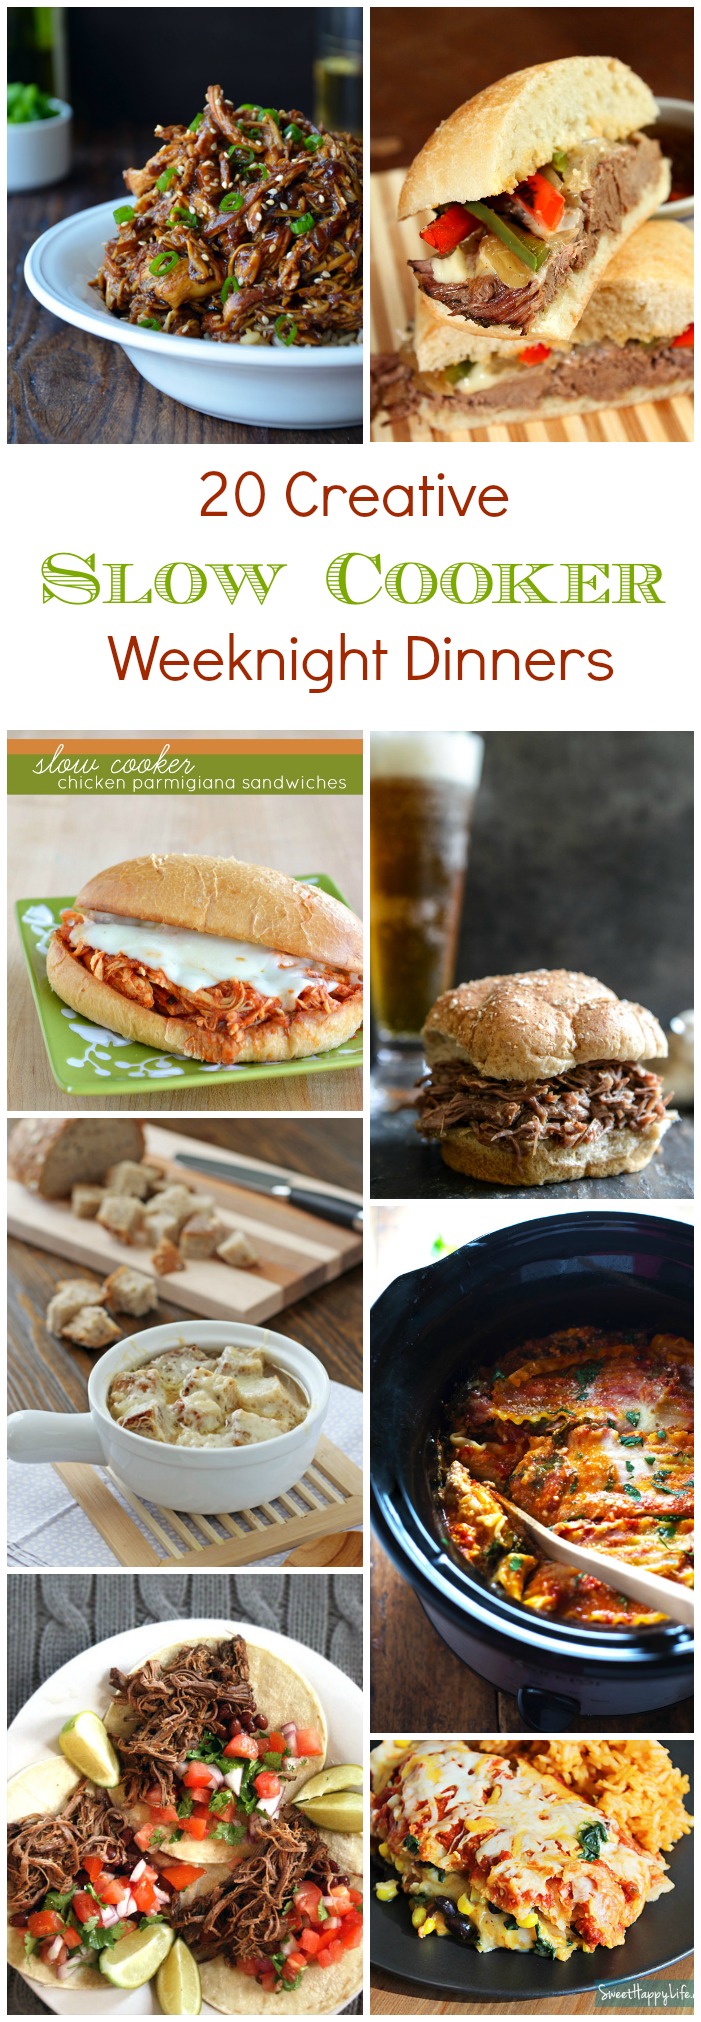 20 Creative Slow Cooker Weeknight Dinner Recipes